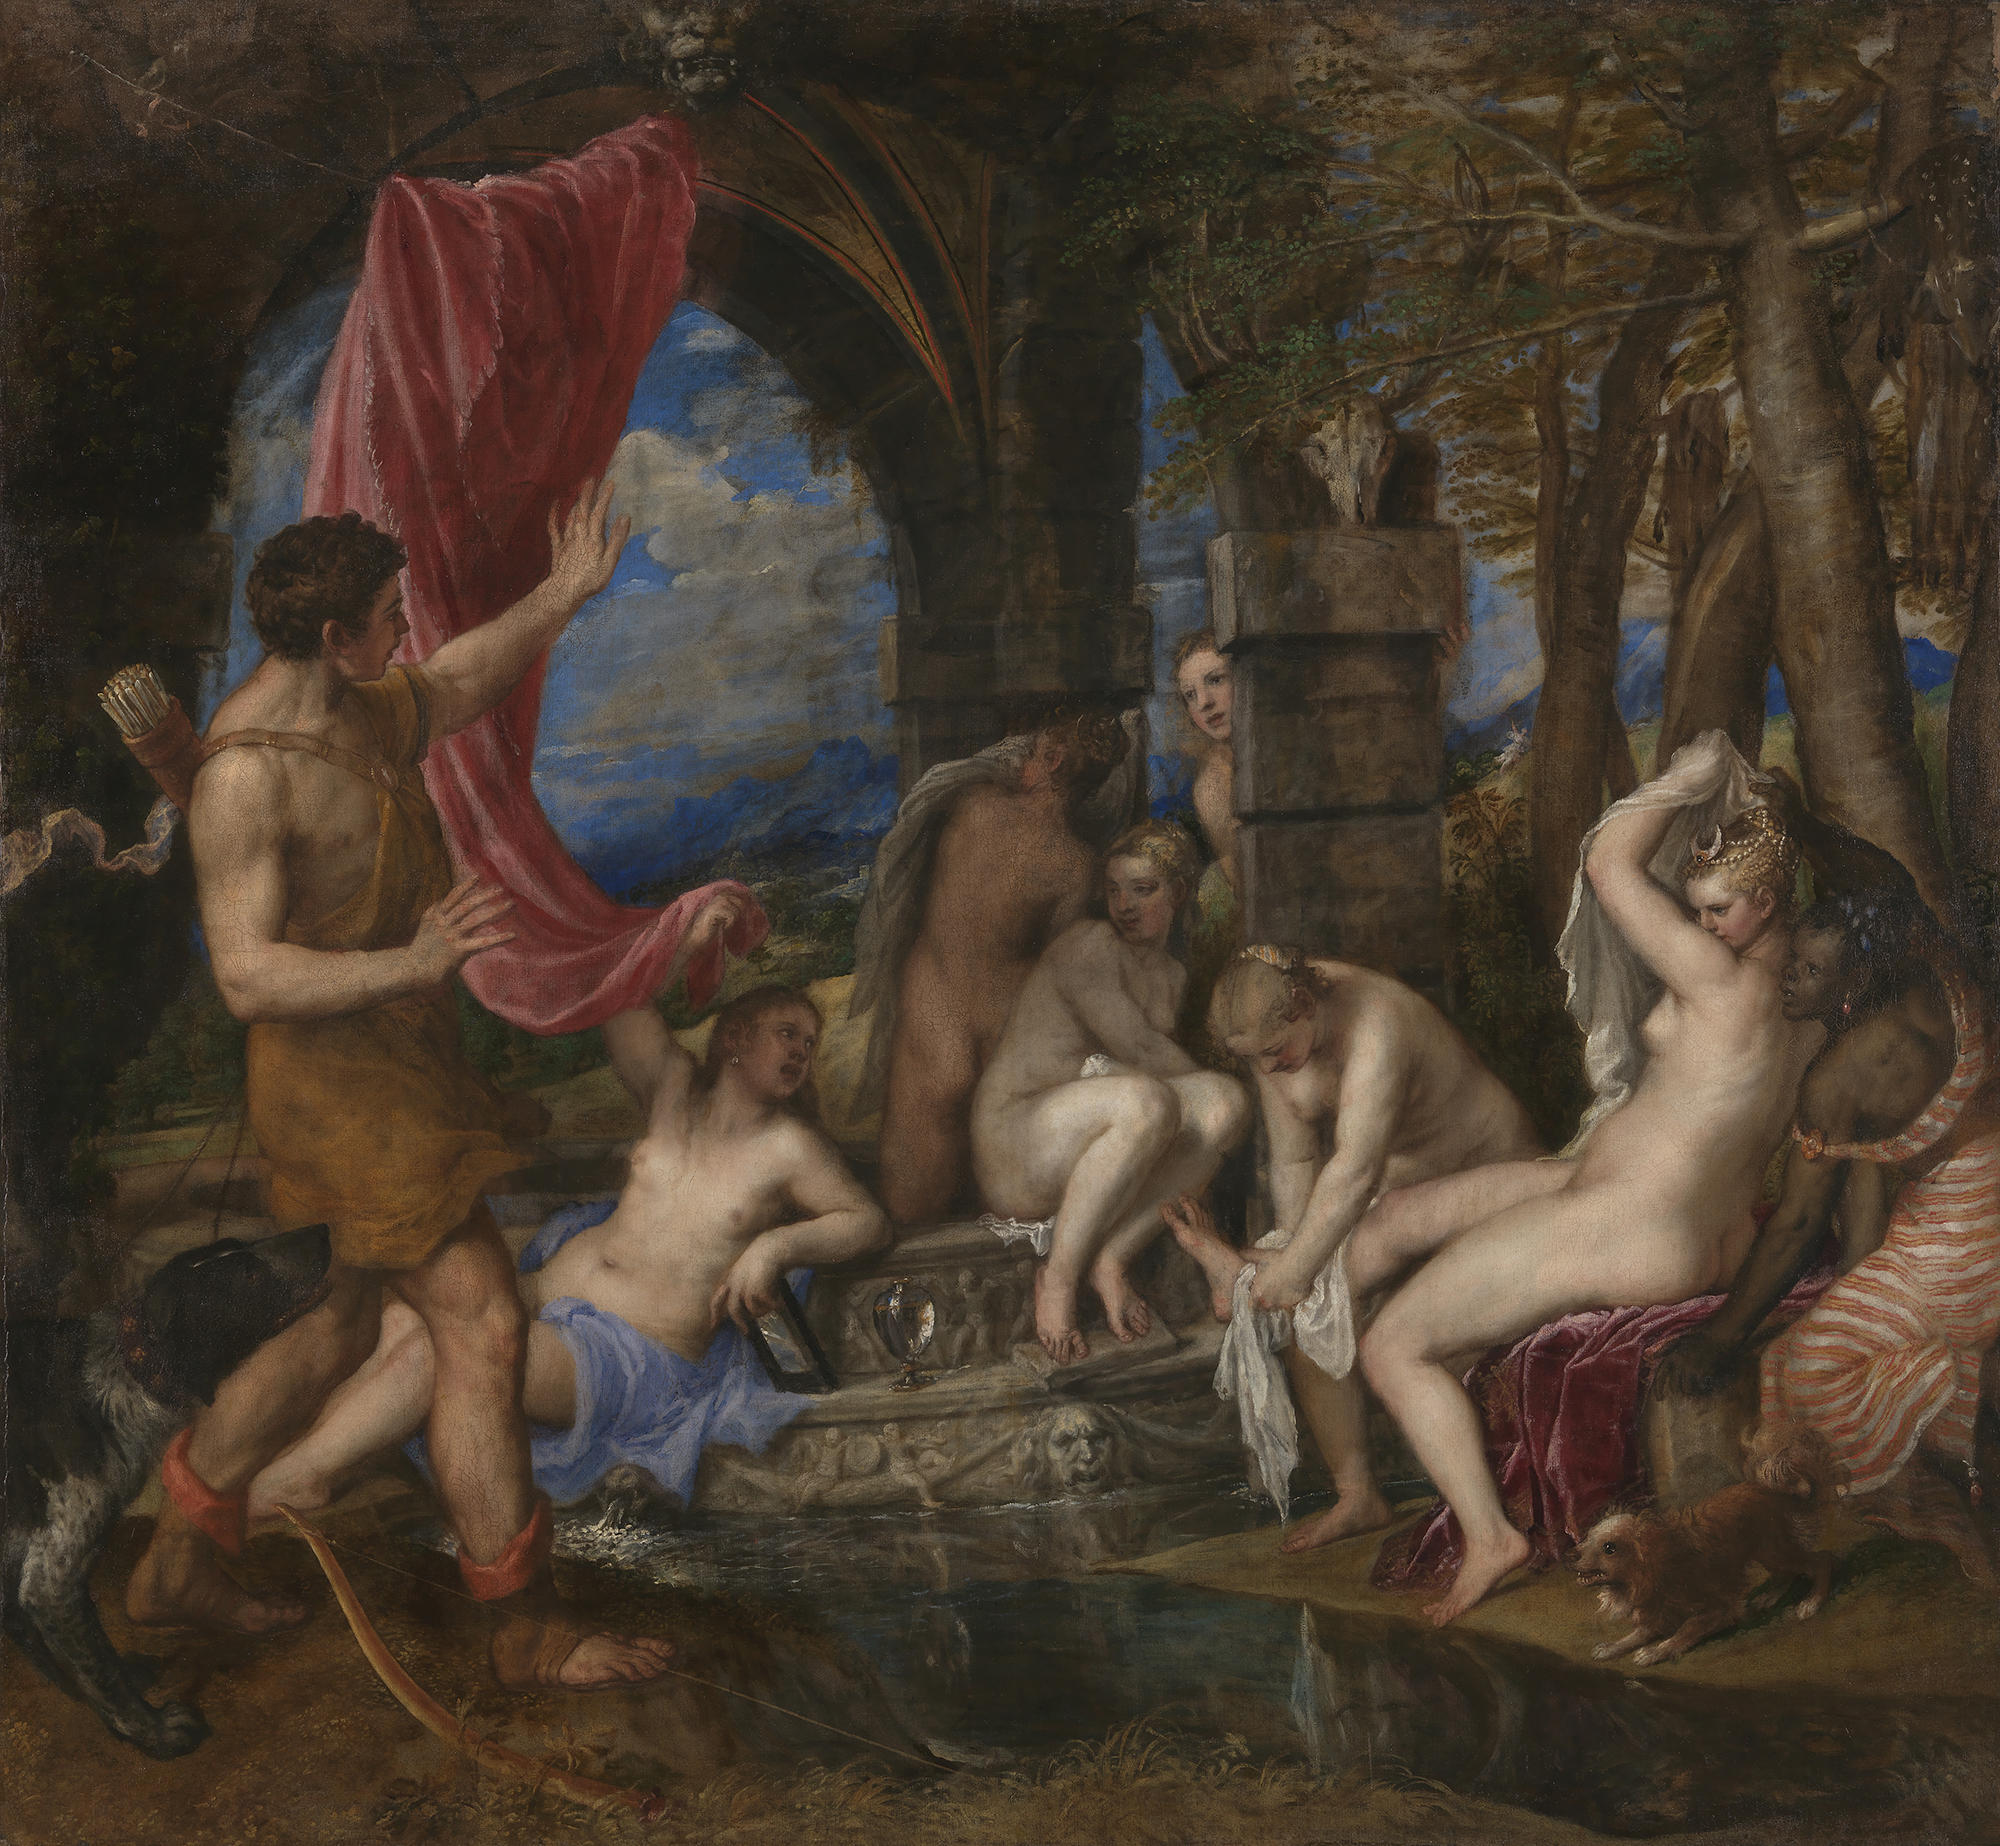 Diana and Actaeon by Titian.